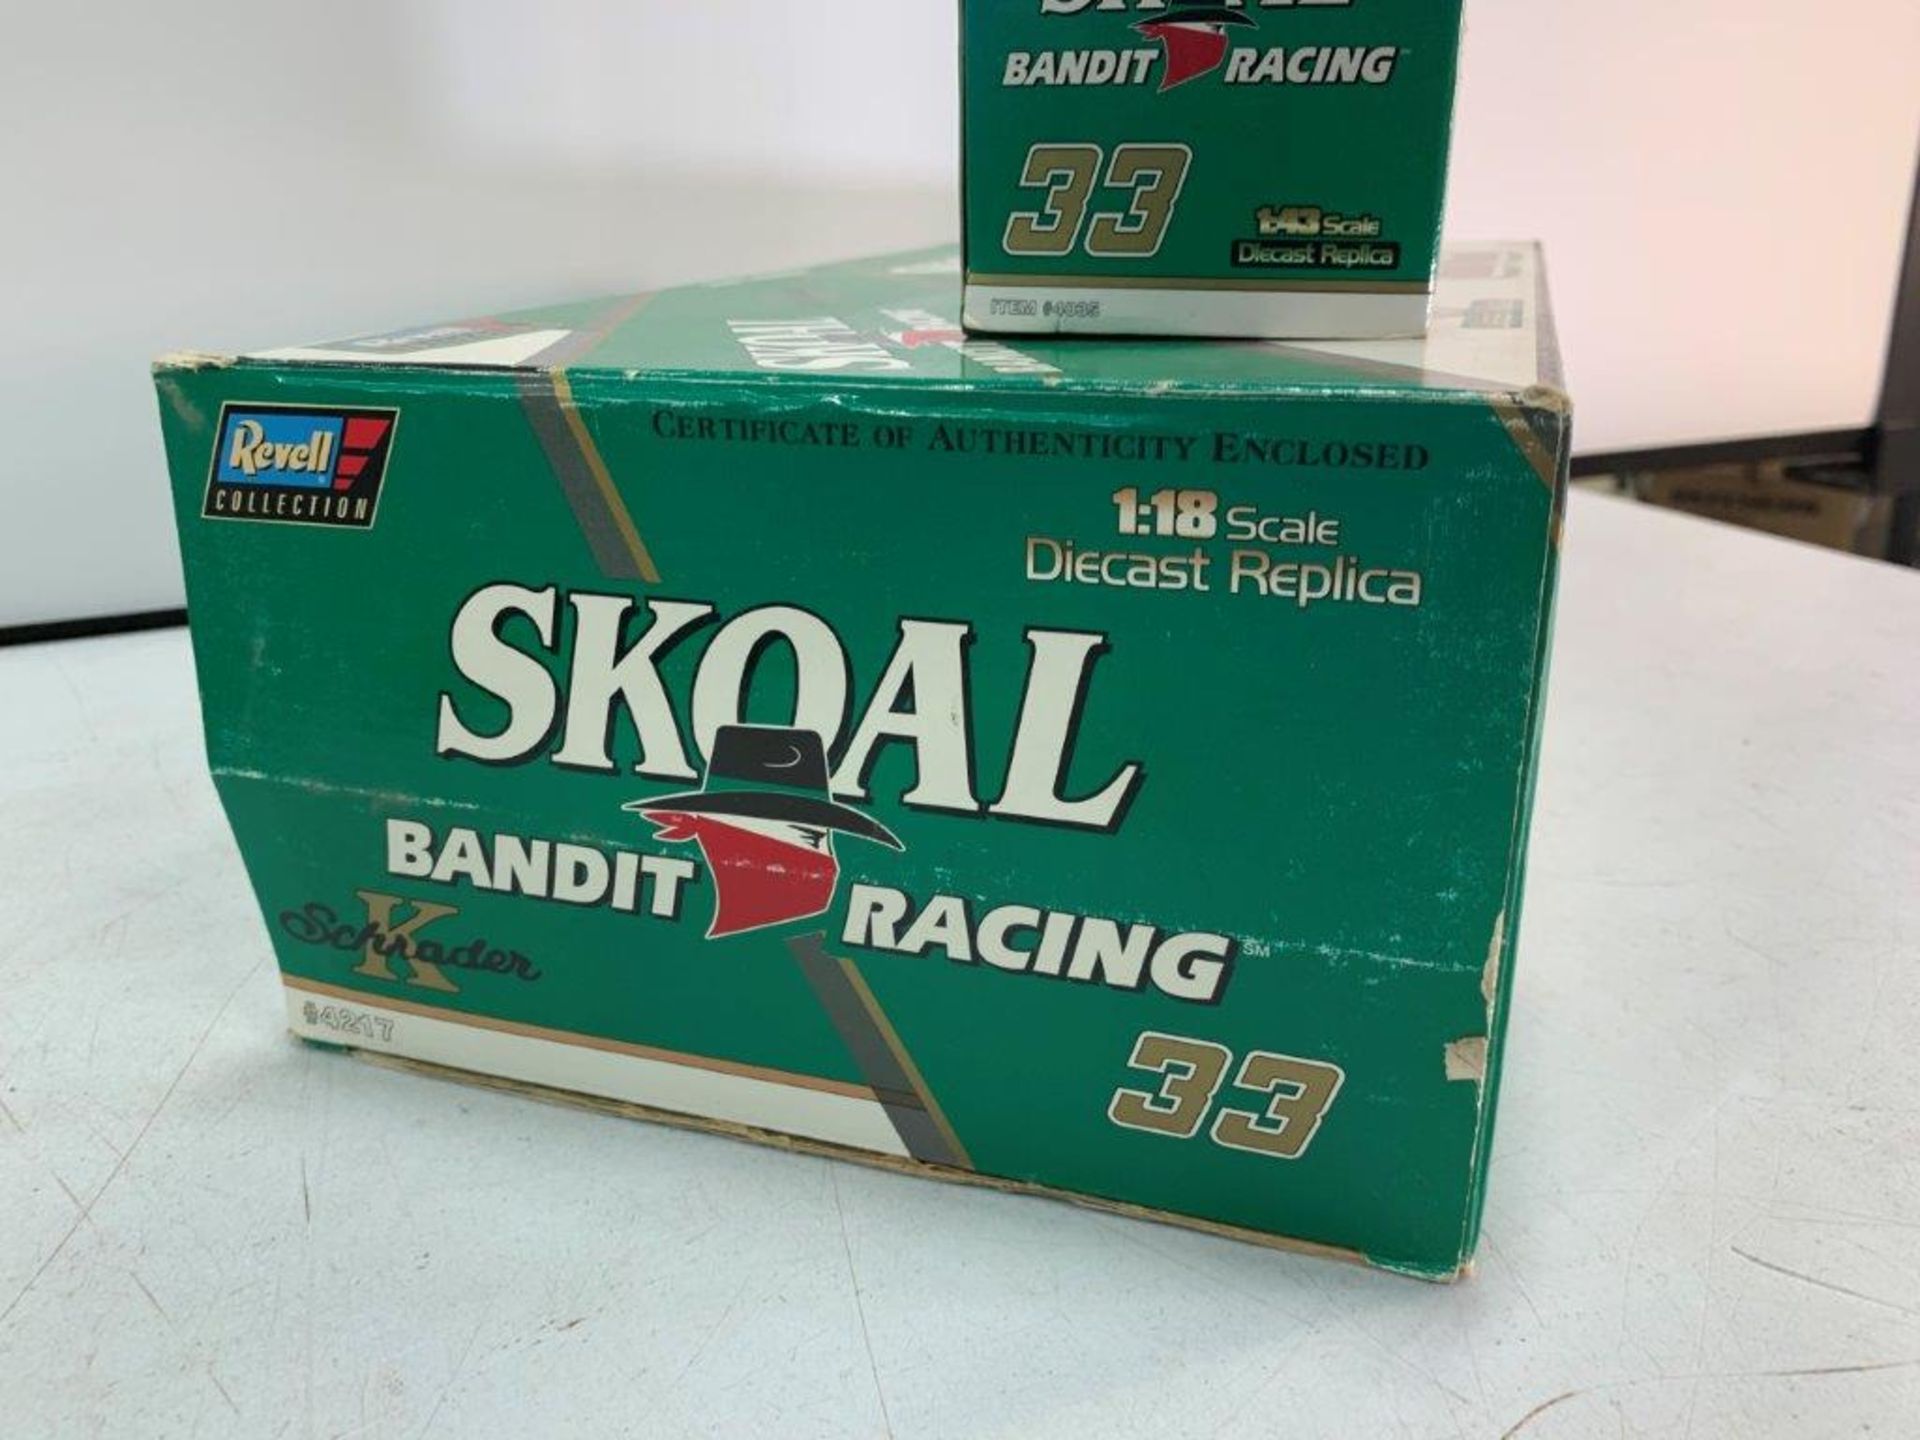 REVELL COLLECTION SKOAL BANDIT RACING DIE CAST REPLICA CARS - Image 2 of 4